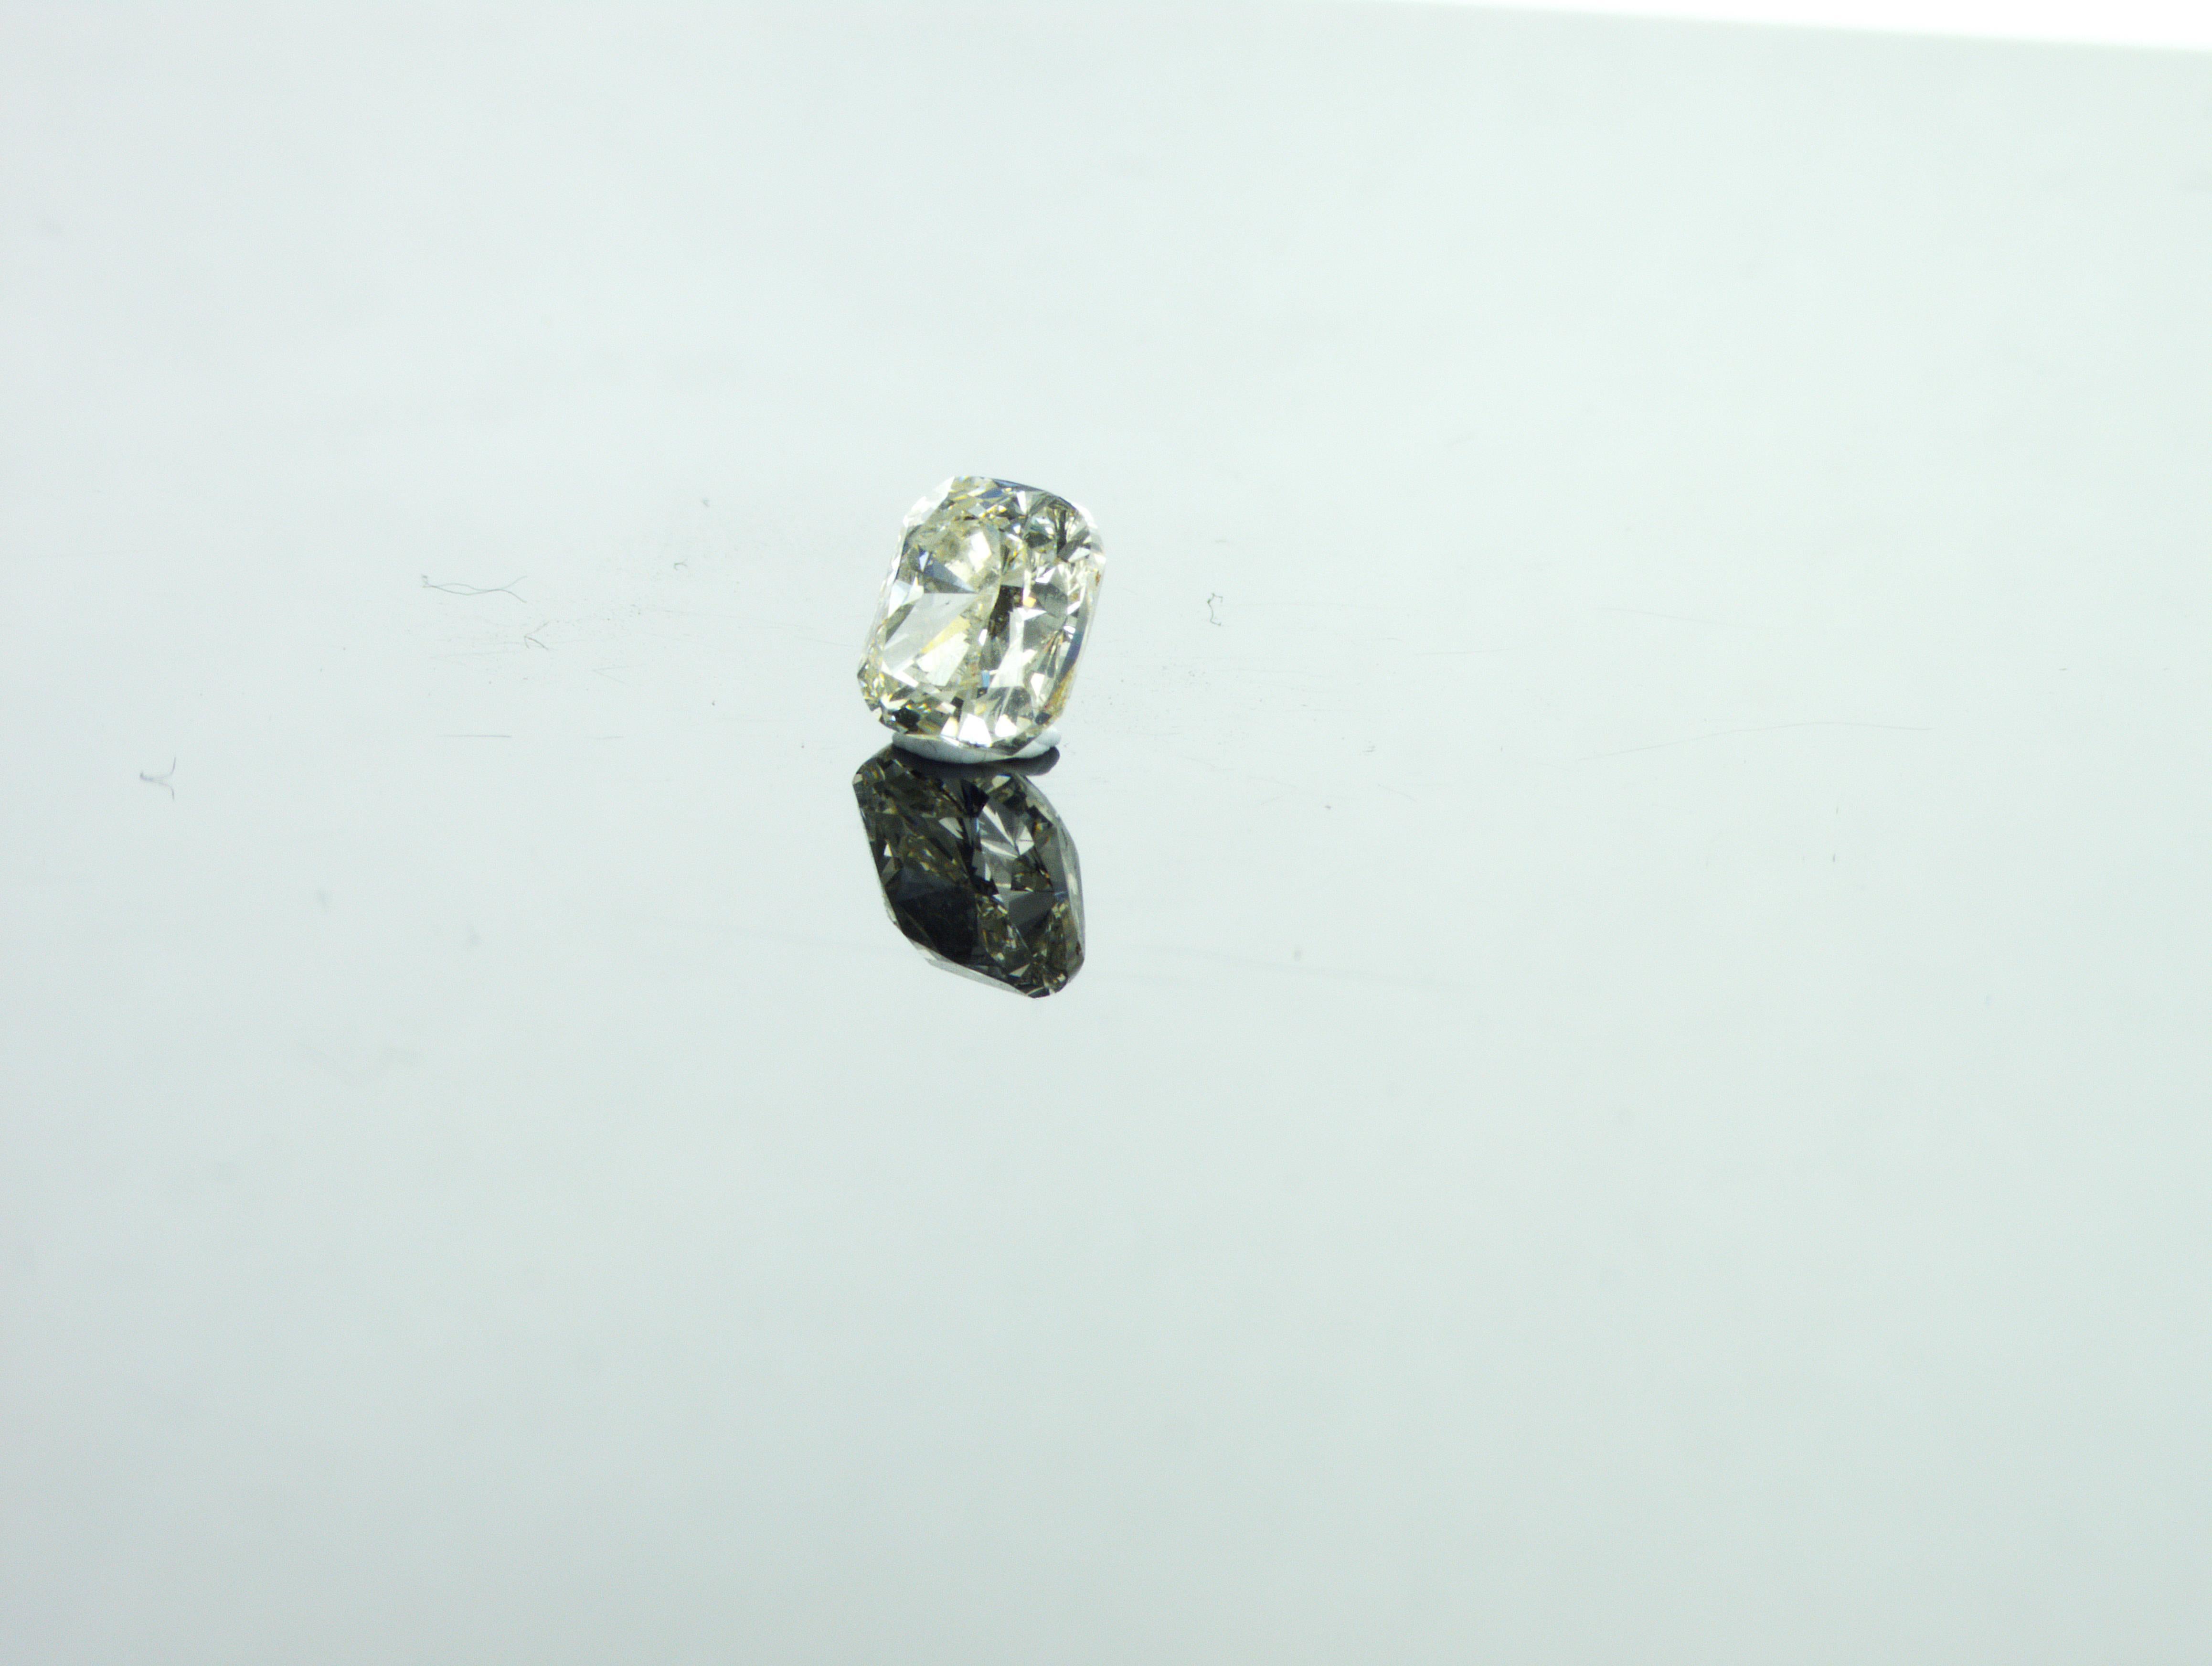 We are natural diamond production company located in Dubai.
Weight: 1.00ct
Shape: Cushion
Color: slightly tinted white (J)
Clarity: SI1
Polish: Very Good
Symm: Fair
Dimensions (mm): 5.81 x 5.47 x 3.46
All our diamonds with the inscription from the